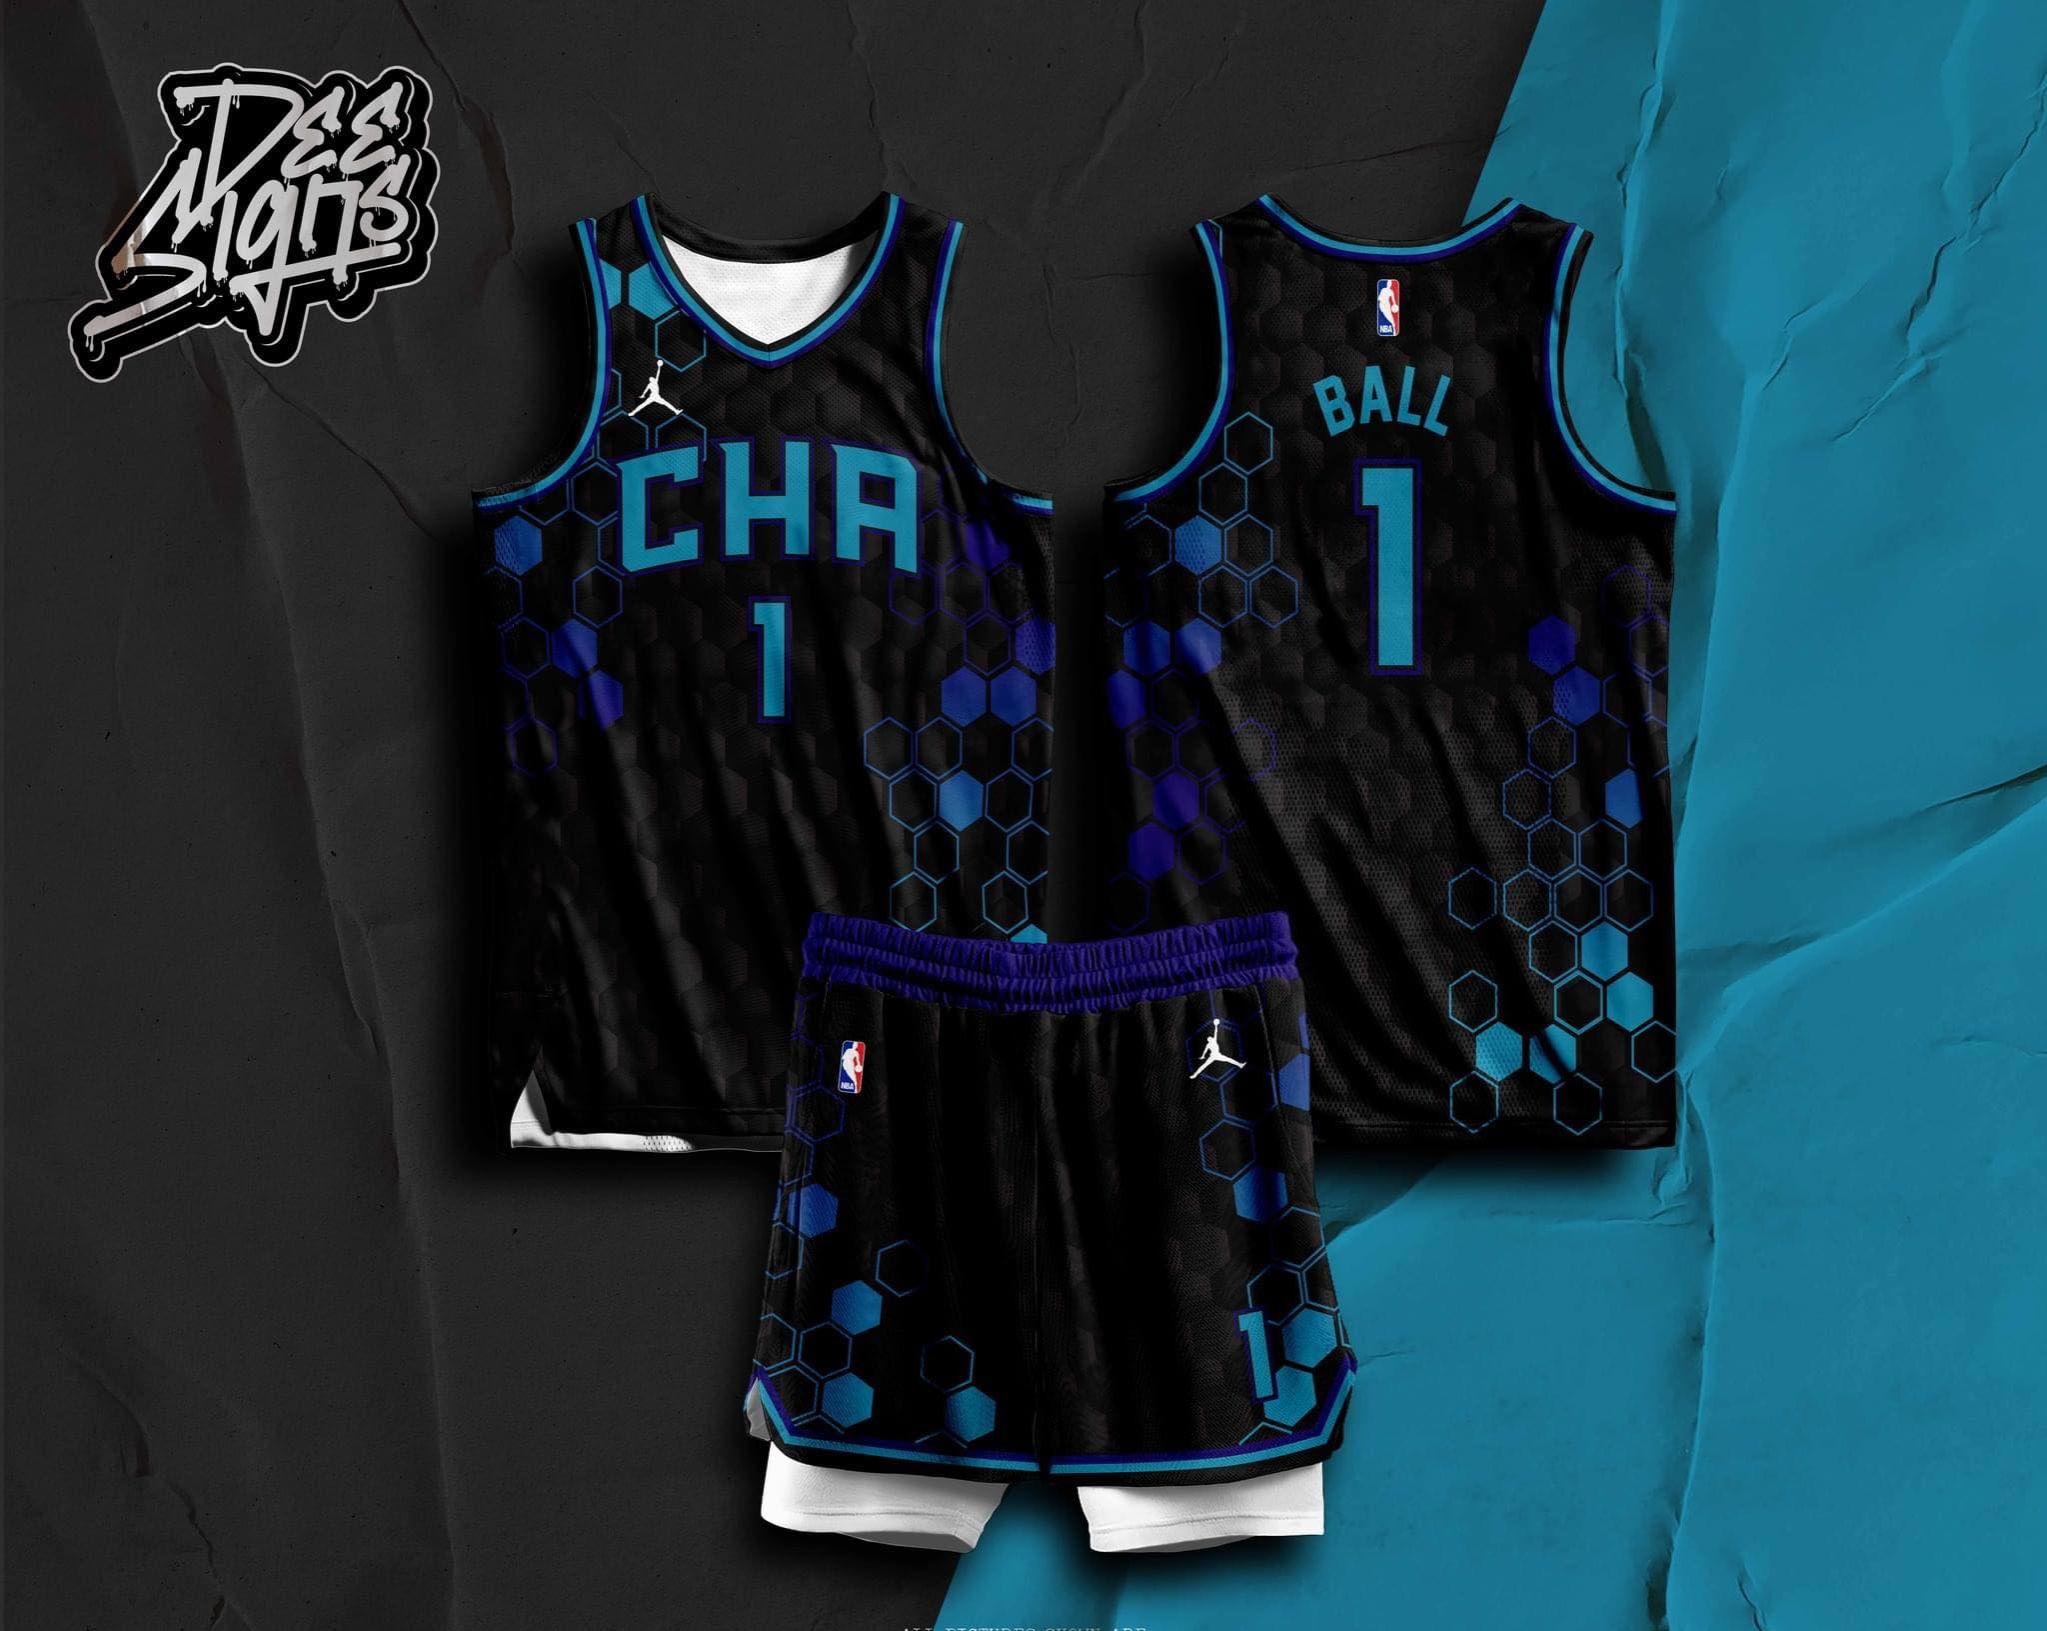 NEW BASKETBALL HORNETS 10 BALL JERSEY FREE CUSTOMIZE NAME & NUMBER ONLY  high quality fabrics & print